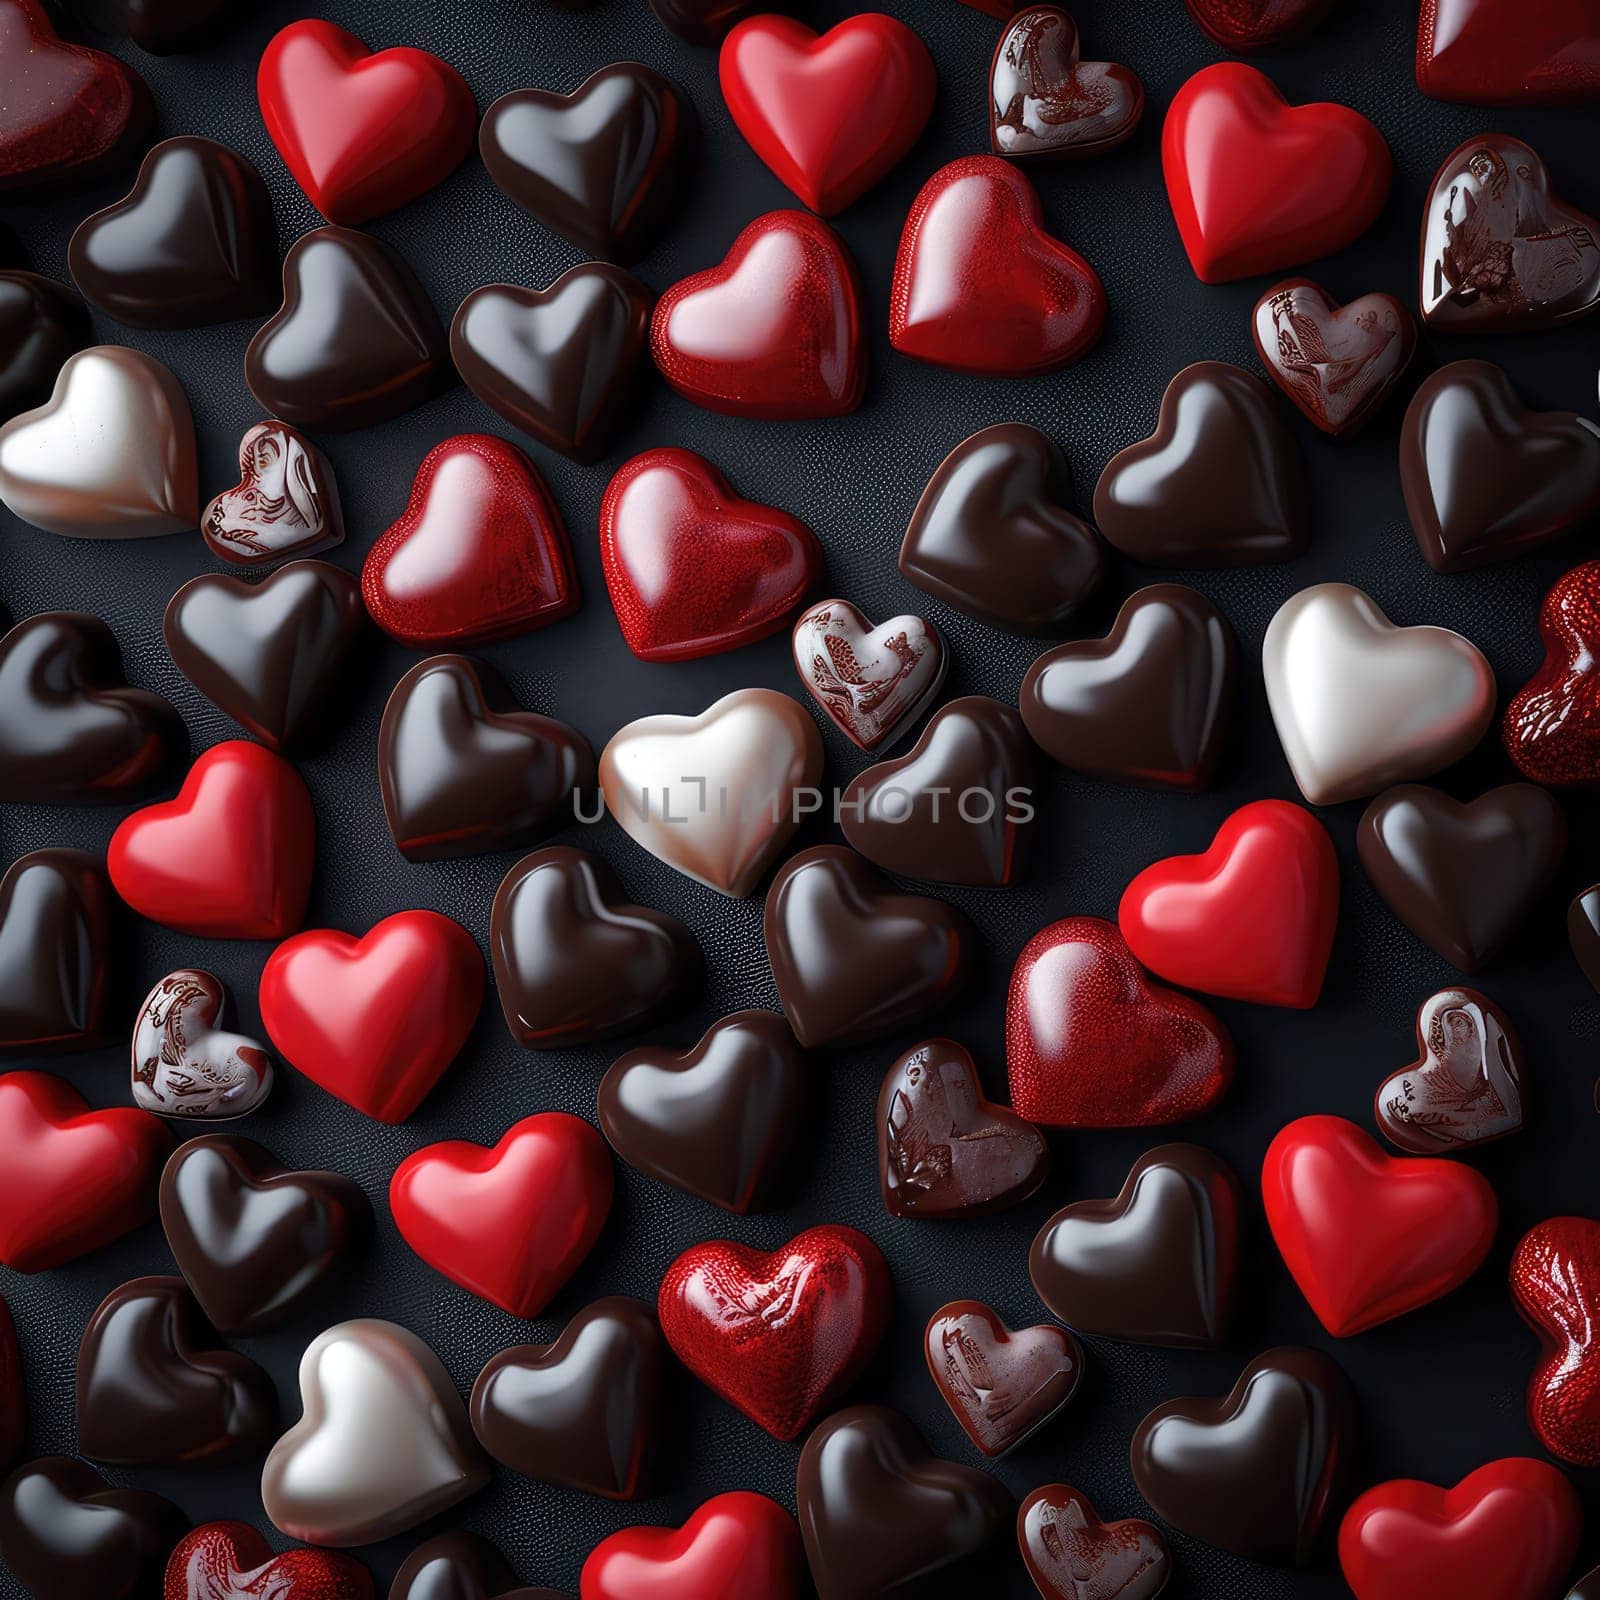 Valentine's Delight: Assorted Heart-Shaped Chocolates on Dark Slate, Embellished with Red Sprinkles.